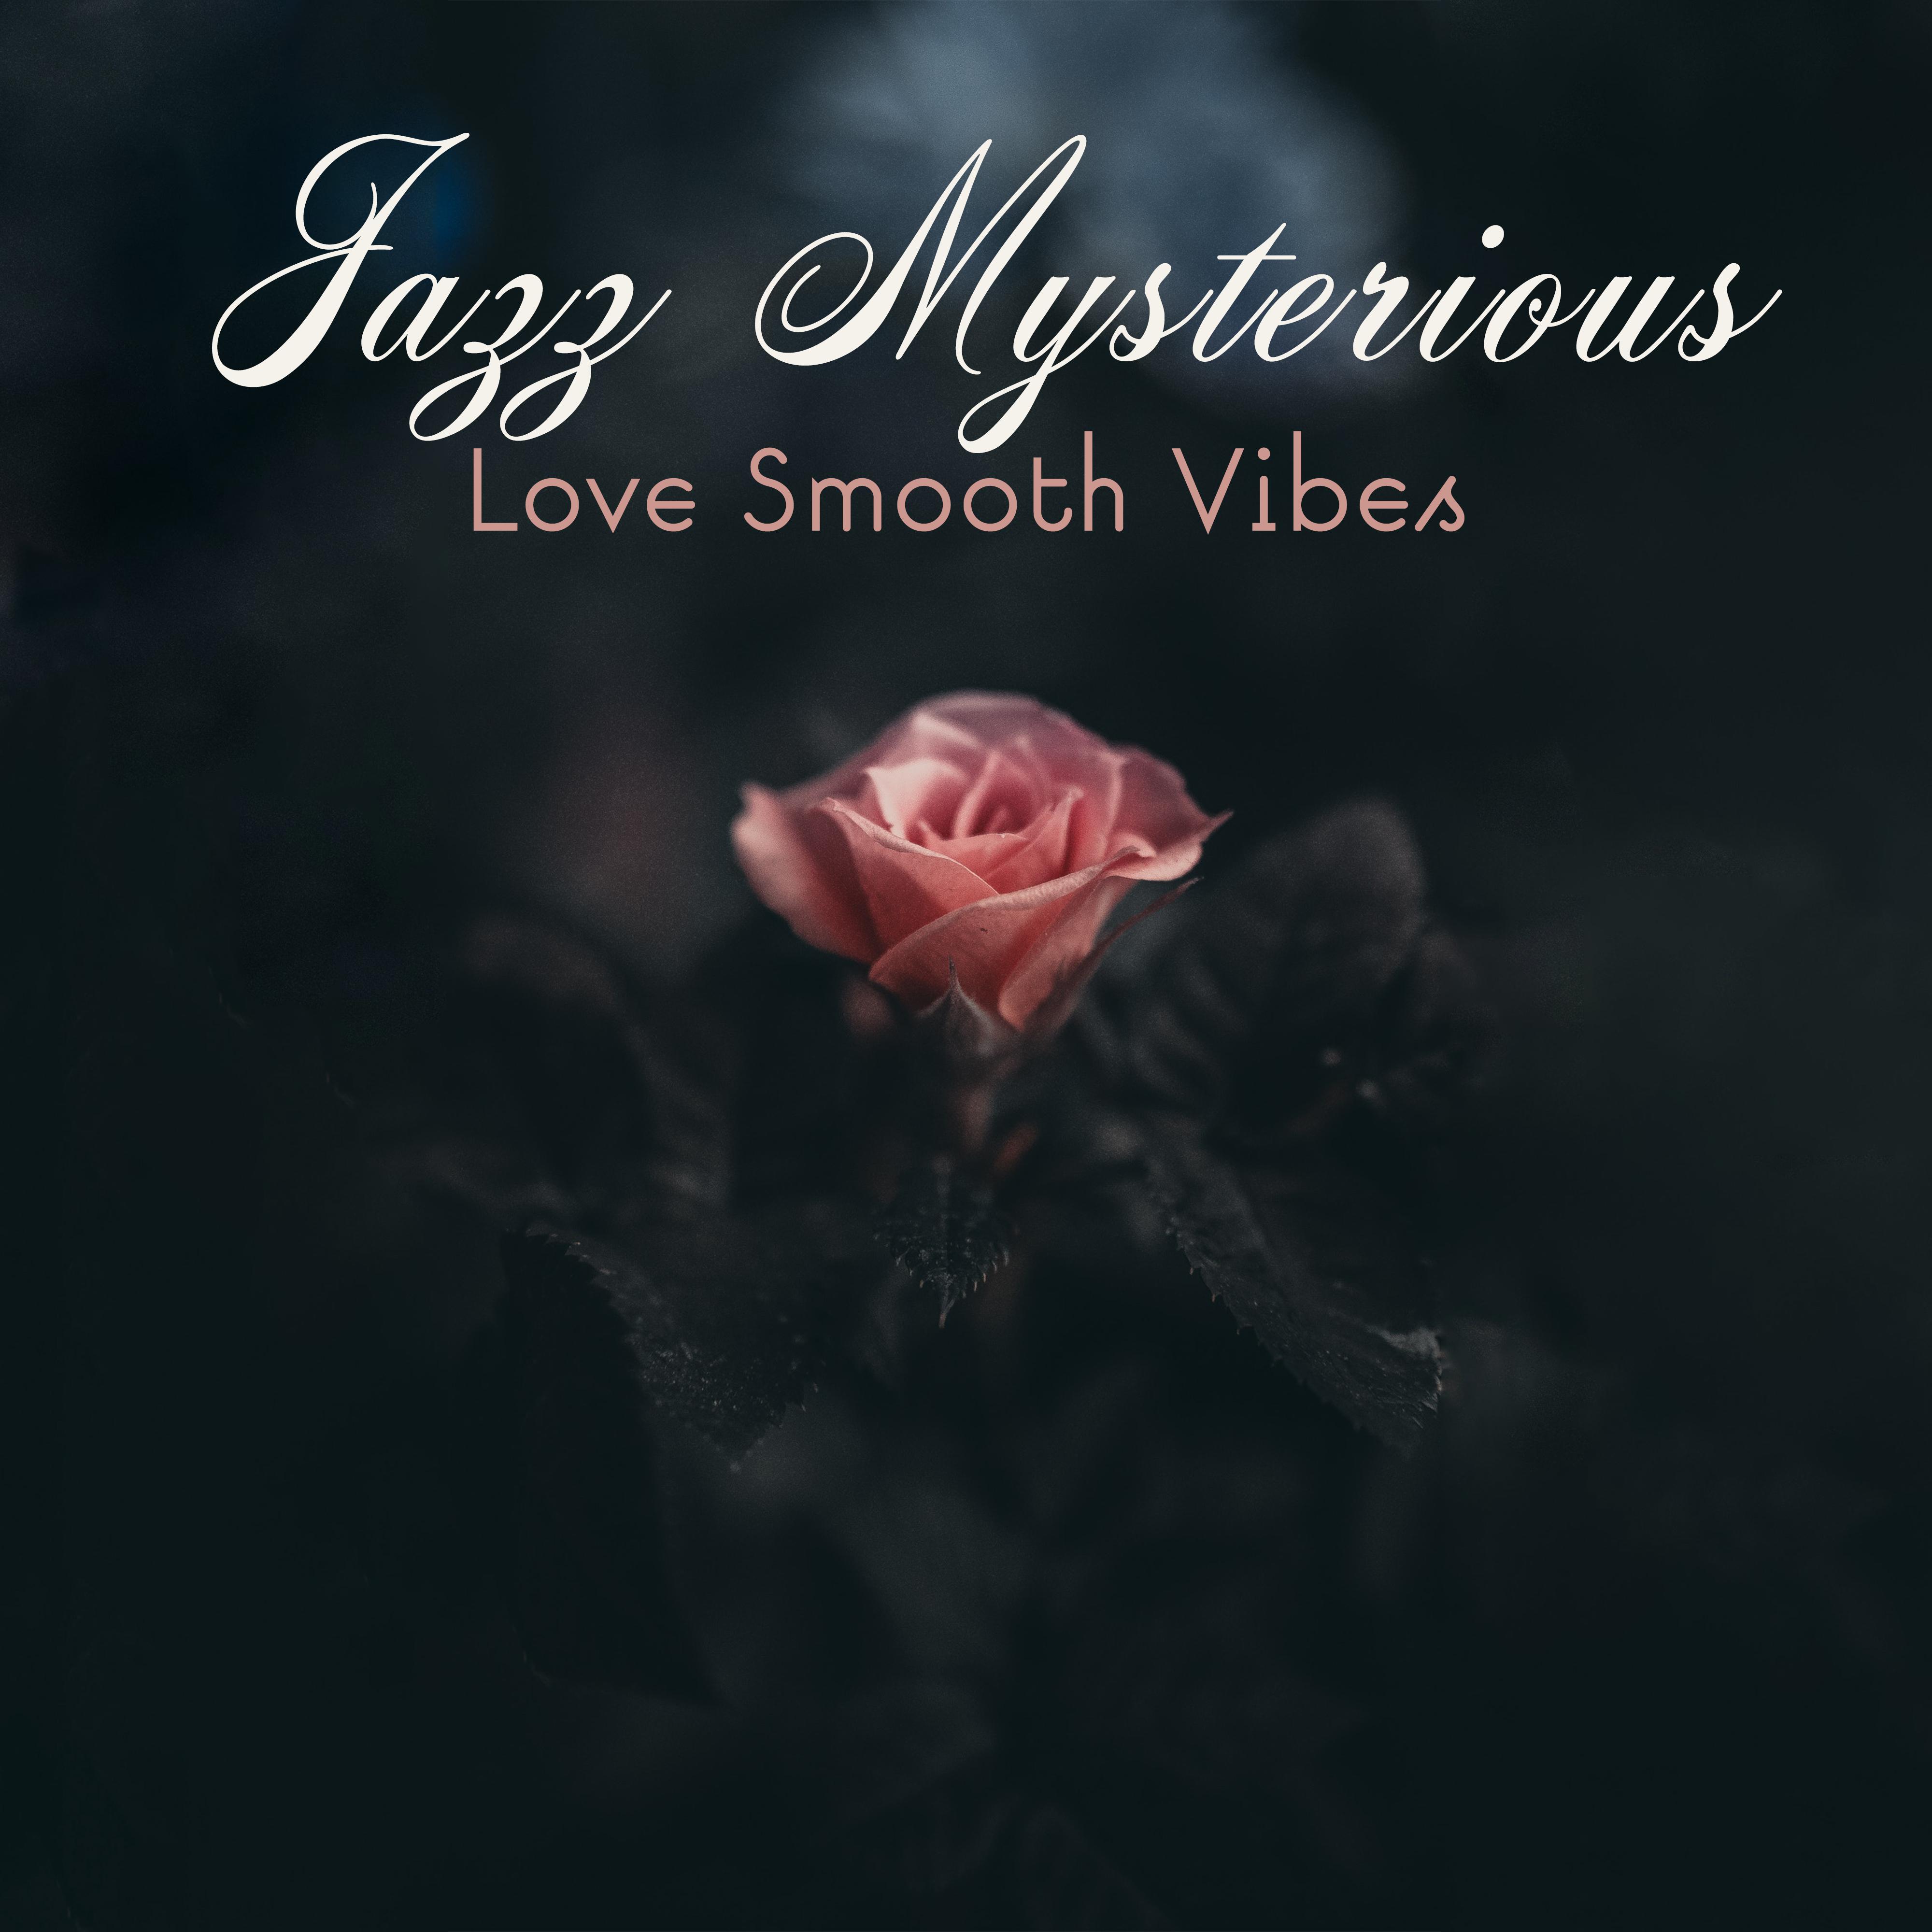 Jazz Mysterious Love Smooth Vibes: 2019 Instrumental Jazz Music for Couples, Romantic Evening Background Sound, Spending Nice Time Together Full of Love & Passion